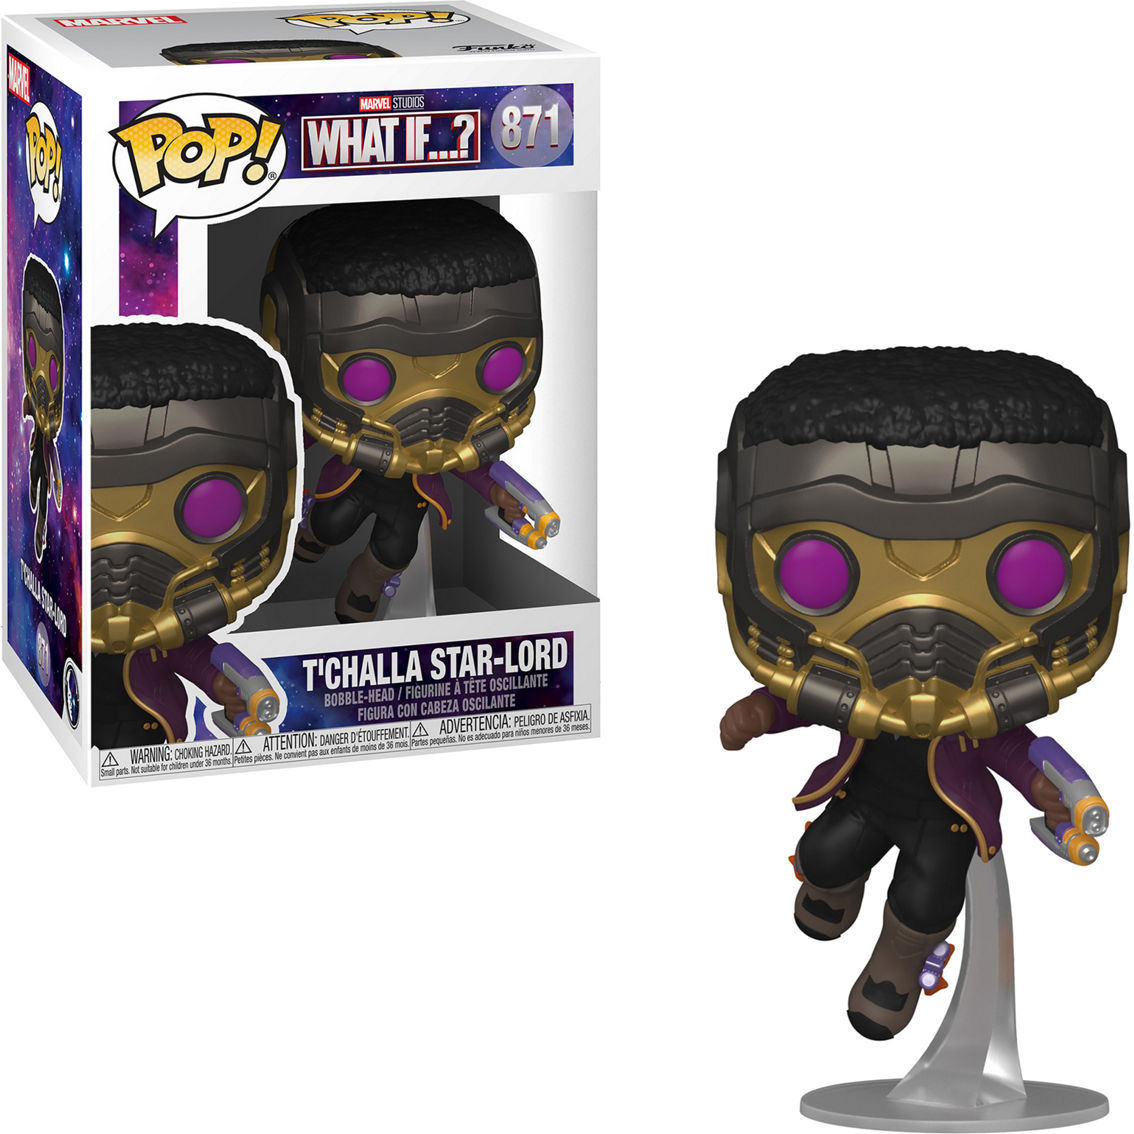 Funko POP! Marvel What If Collector Set - Image 4 of 7